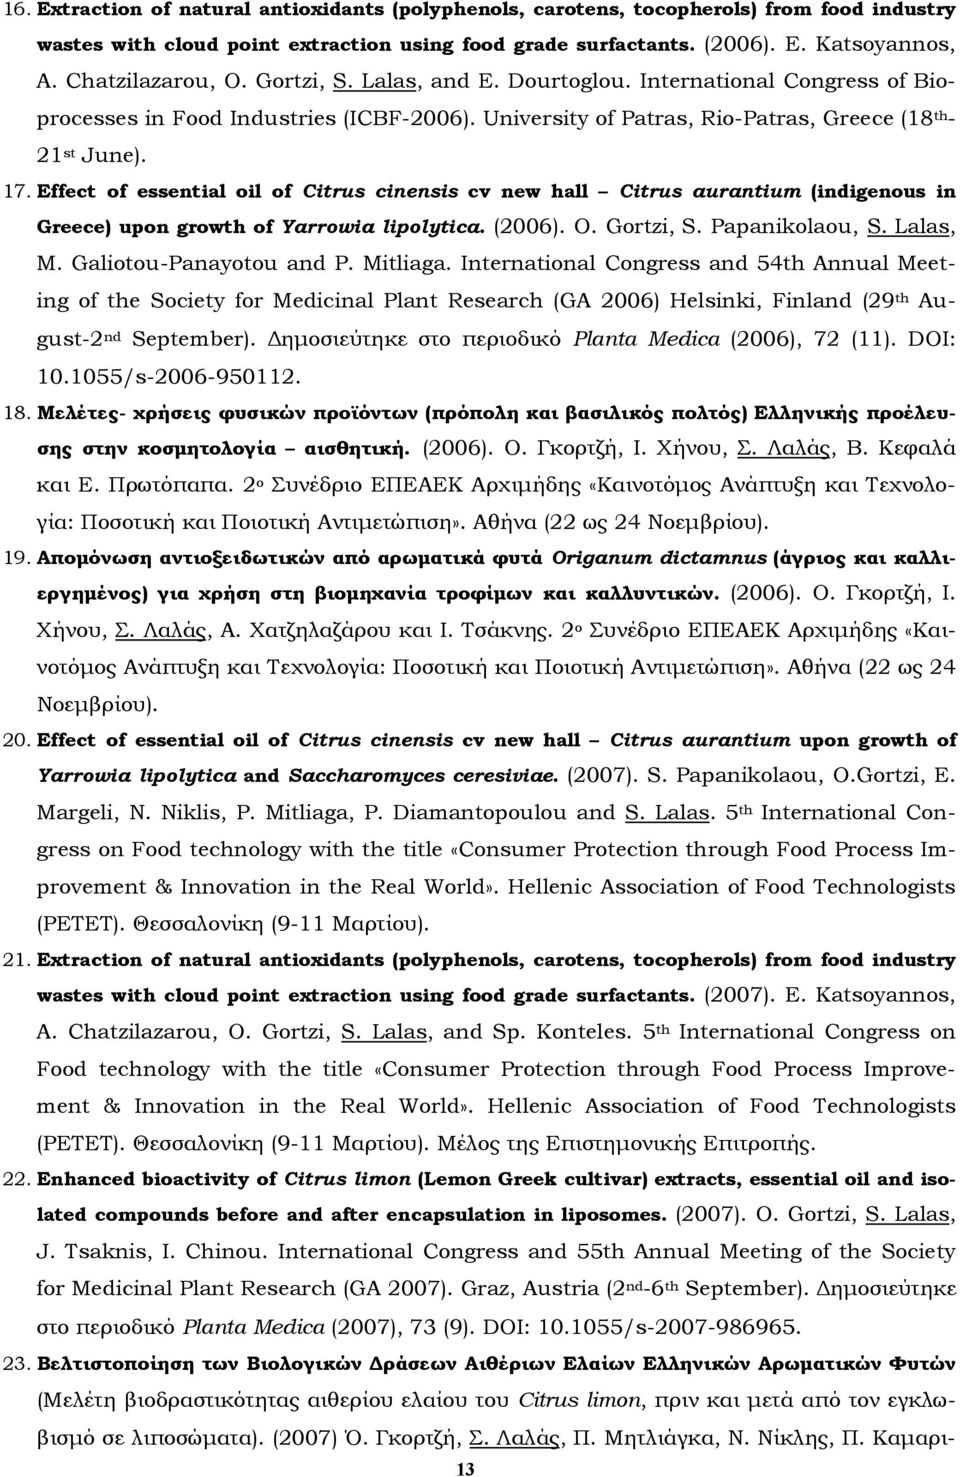 Effect of essential oil of Citrus cinensis cv new hall Citrus aurantium (indigenous in Greece) upon growth of Yarrowia lipolytica. (2006). O. Gortzi, S. Papanikolaou, S. Lalas, M.